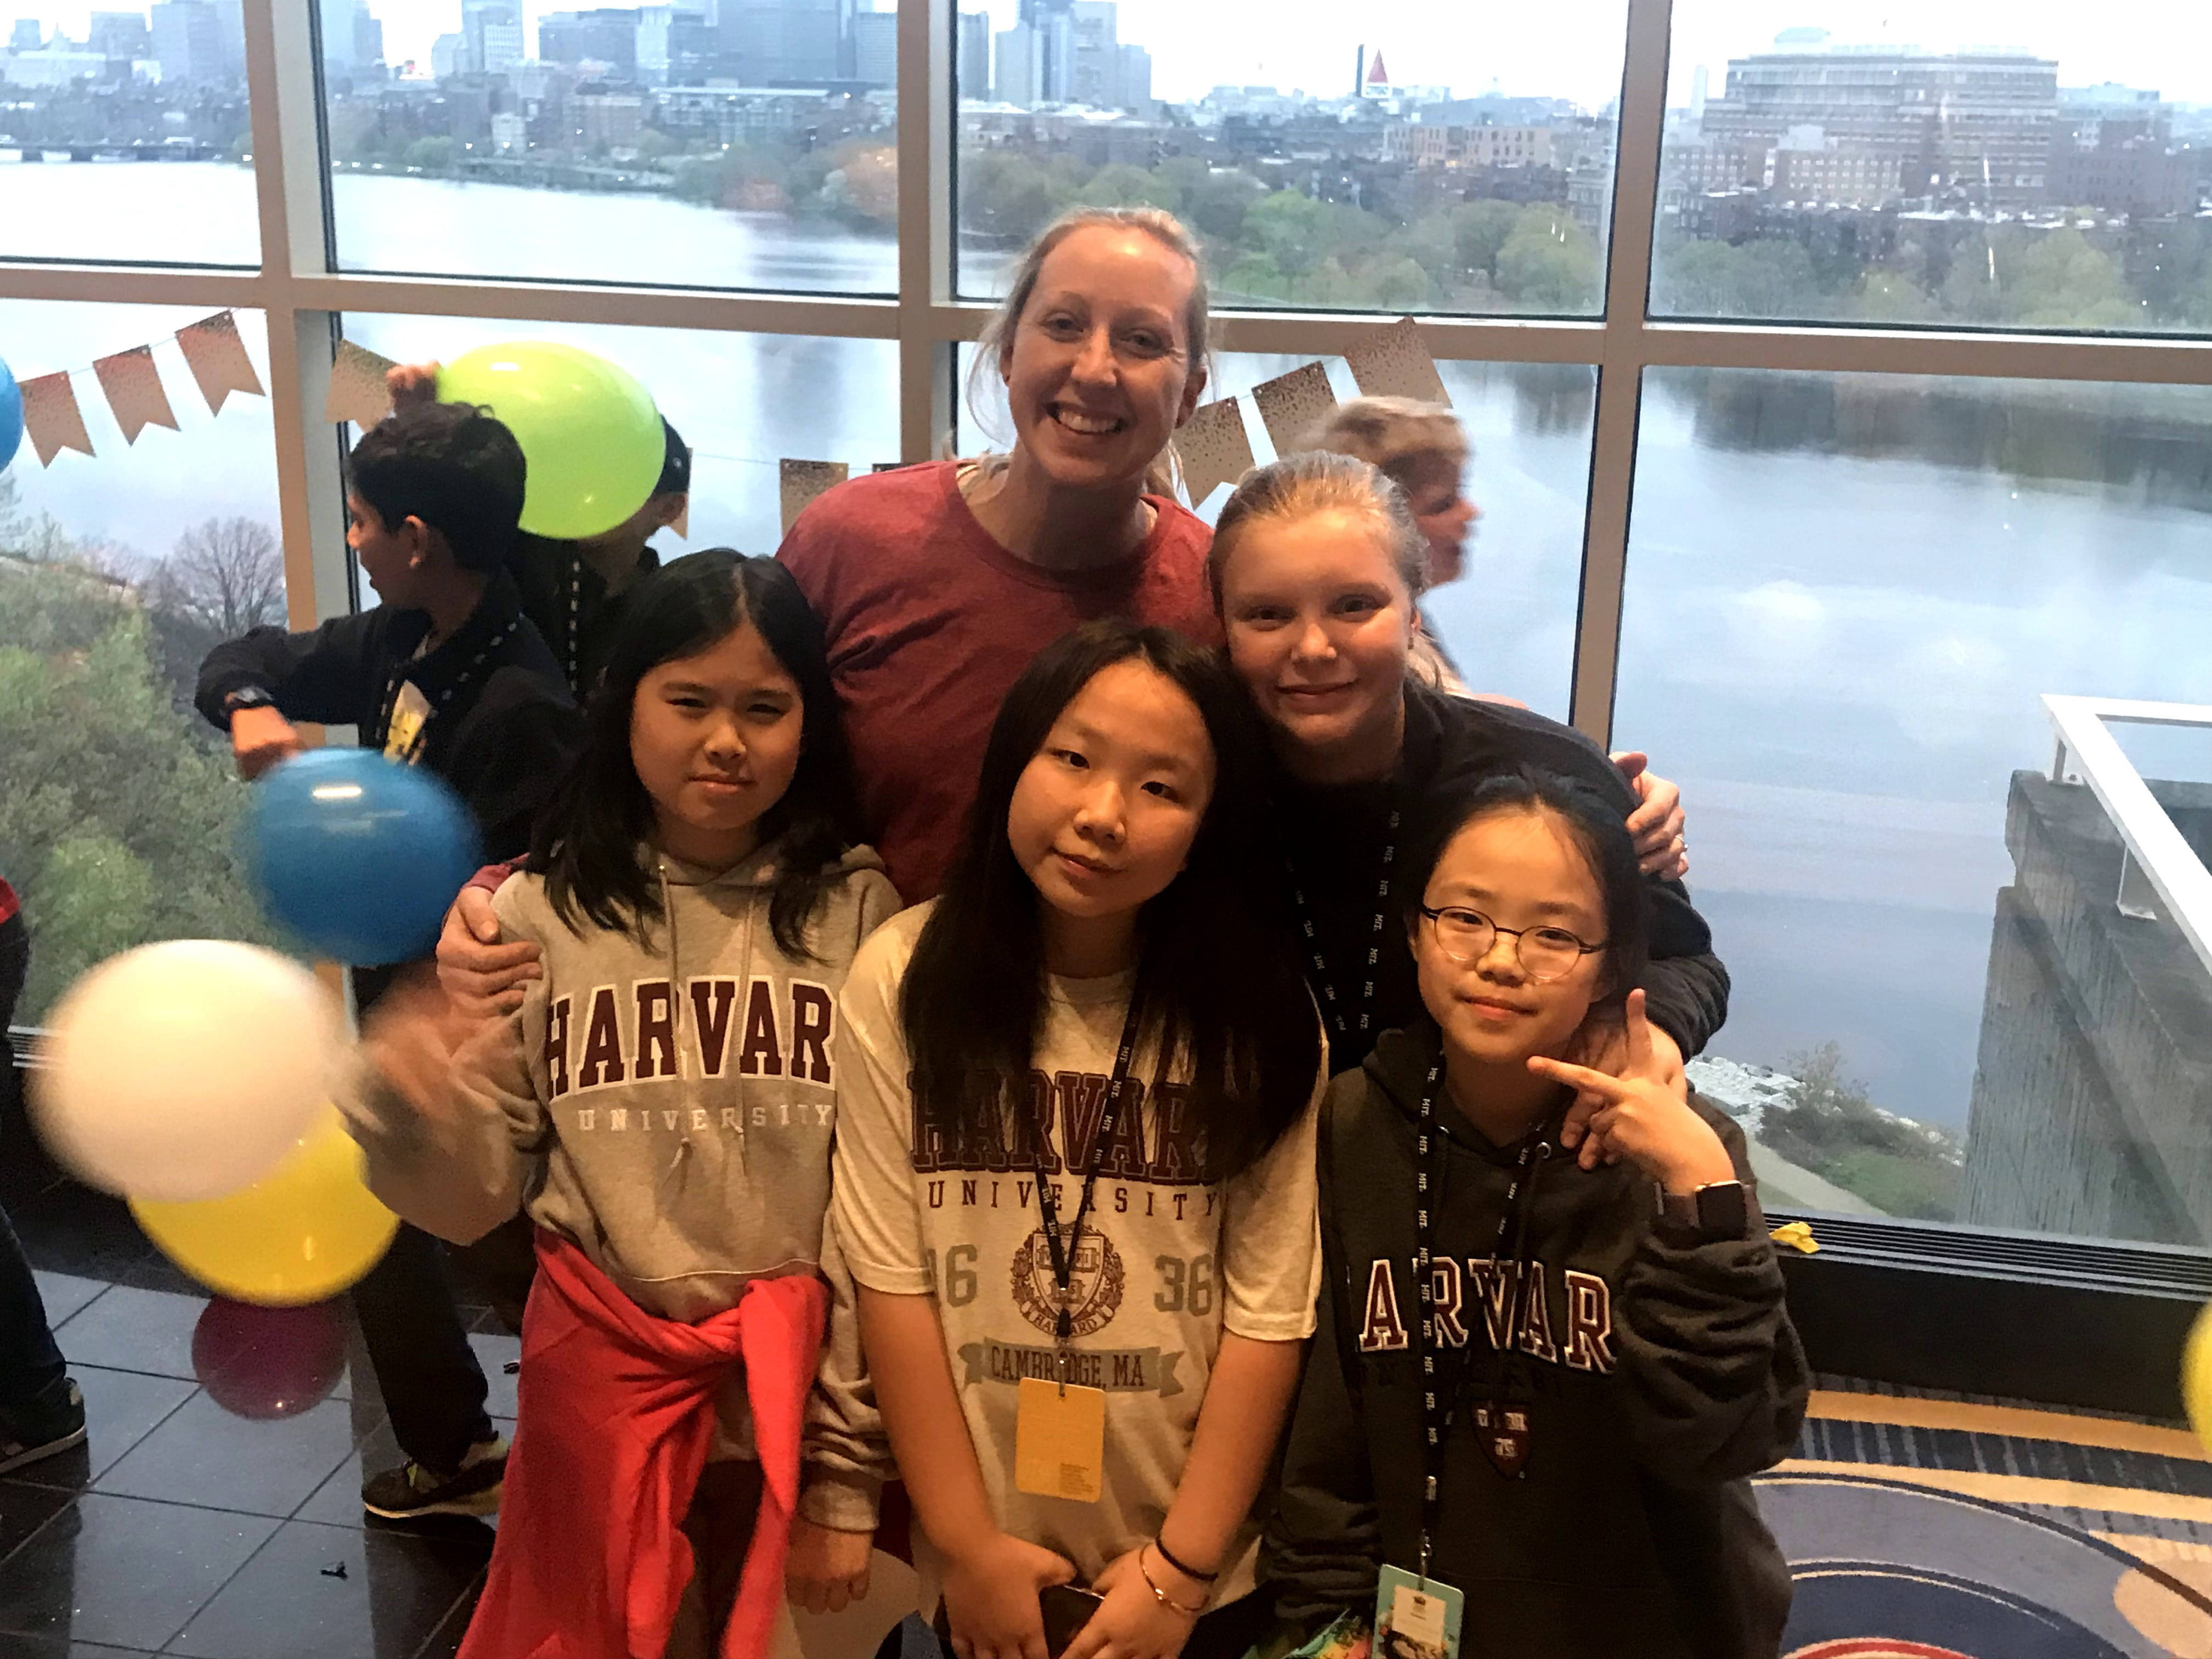 Northbridge students attend 2019 STEAM week at the Massachusetts Institute of Technology - northbridge-students-attend-2019-steam-week-at-the-massachusetts-institute-of-technology